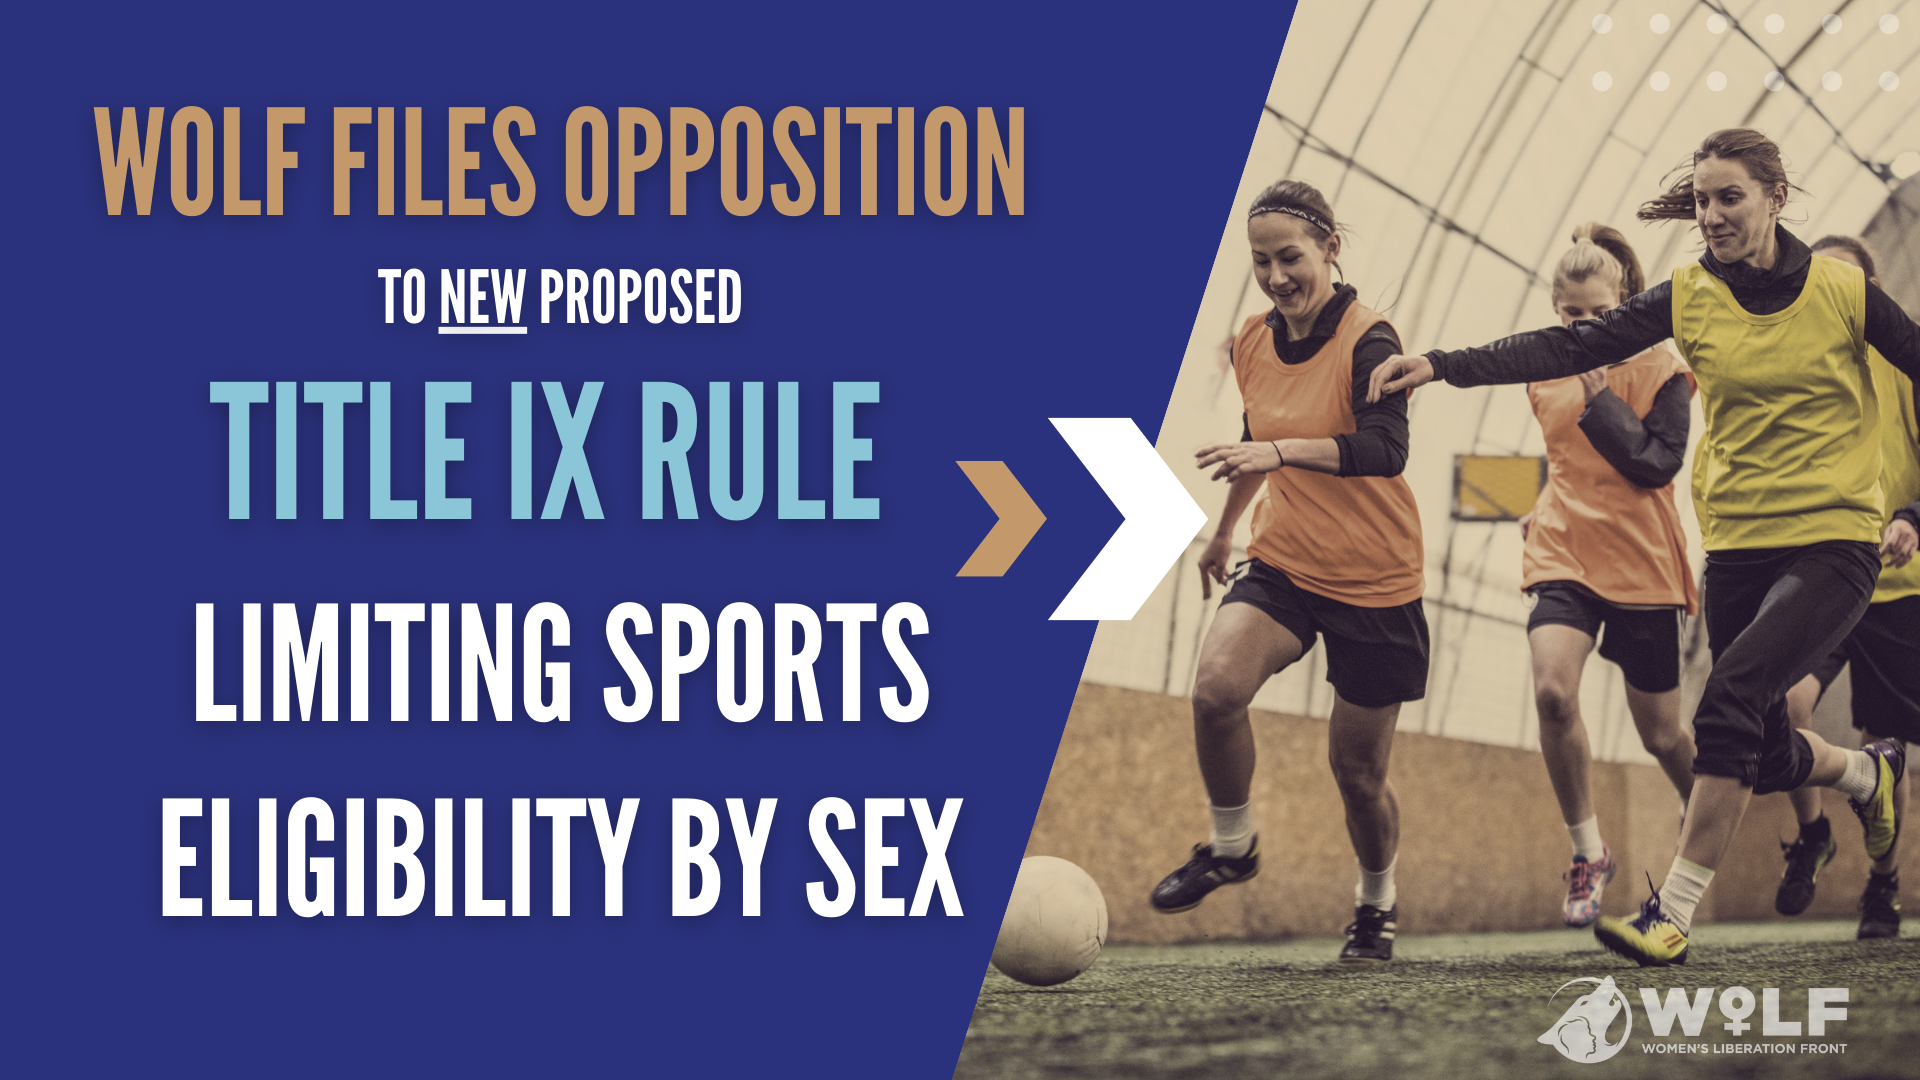 WoLF Files Opposition to Proposed Title IX Rule Limiting Sports